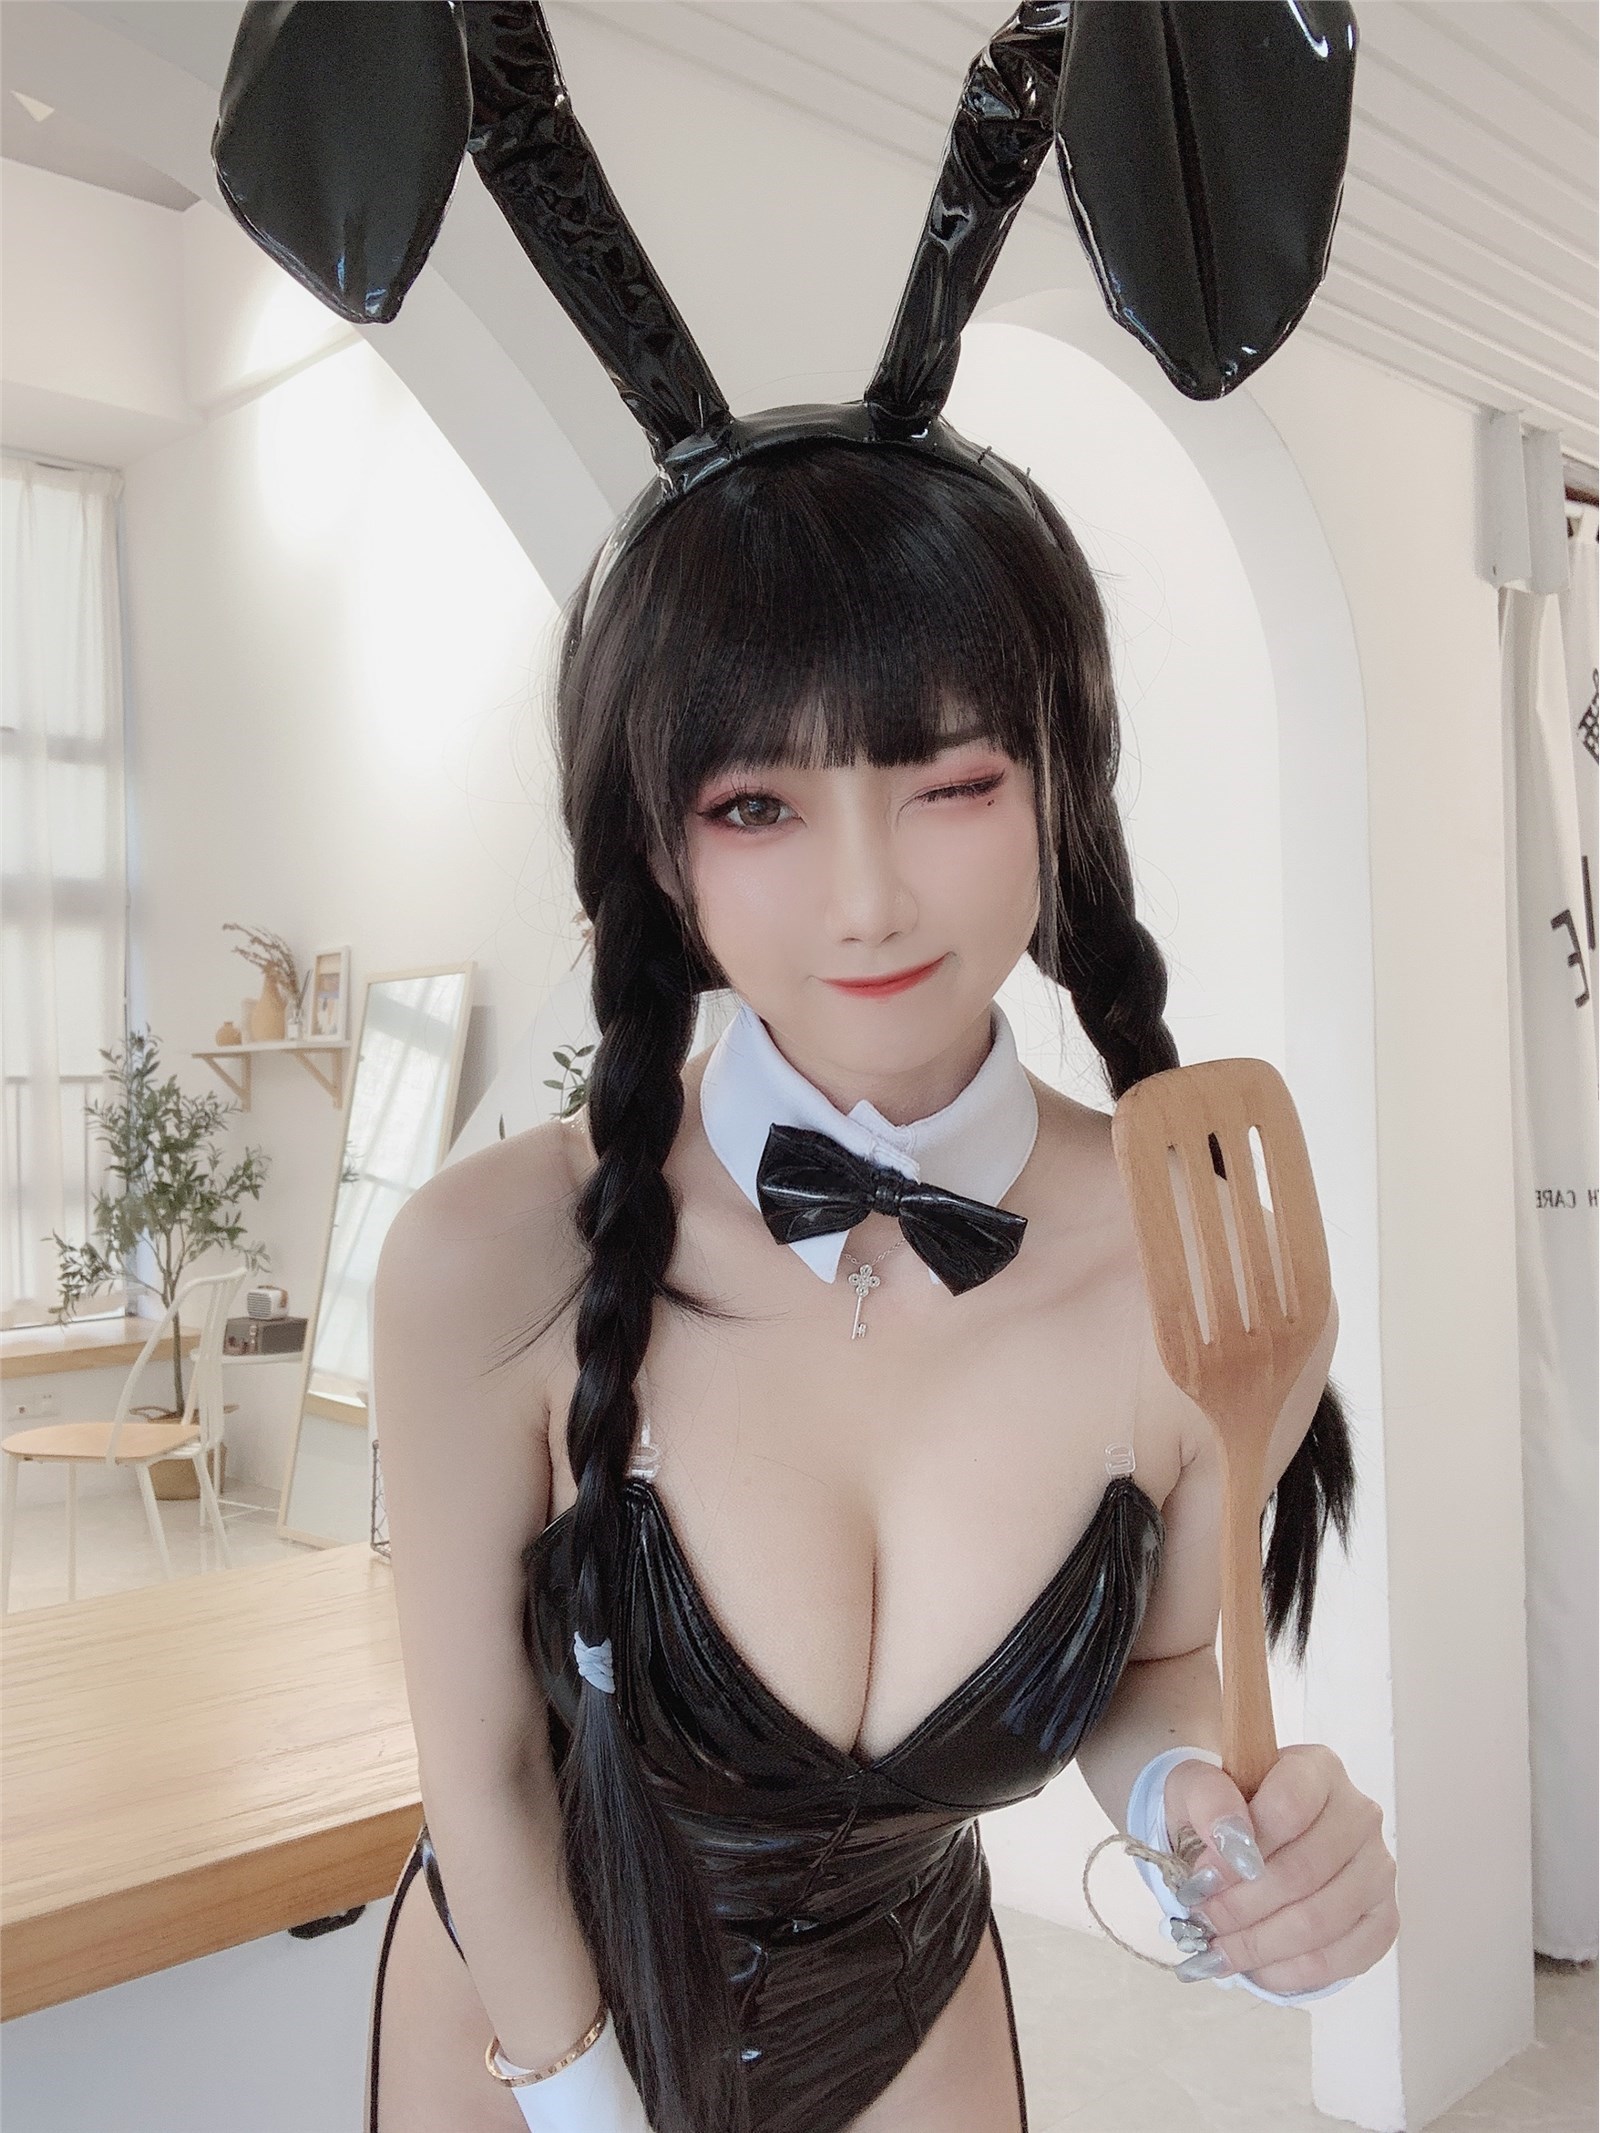 Is the ghost animal Yao in the Black Bunny(7)